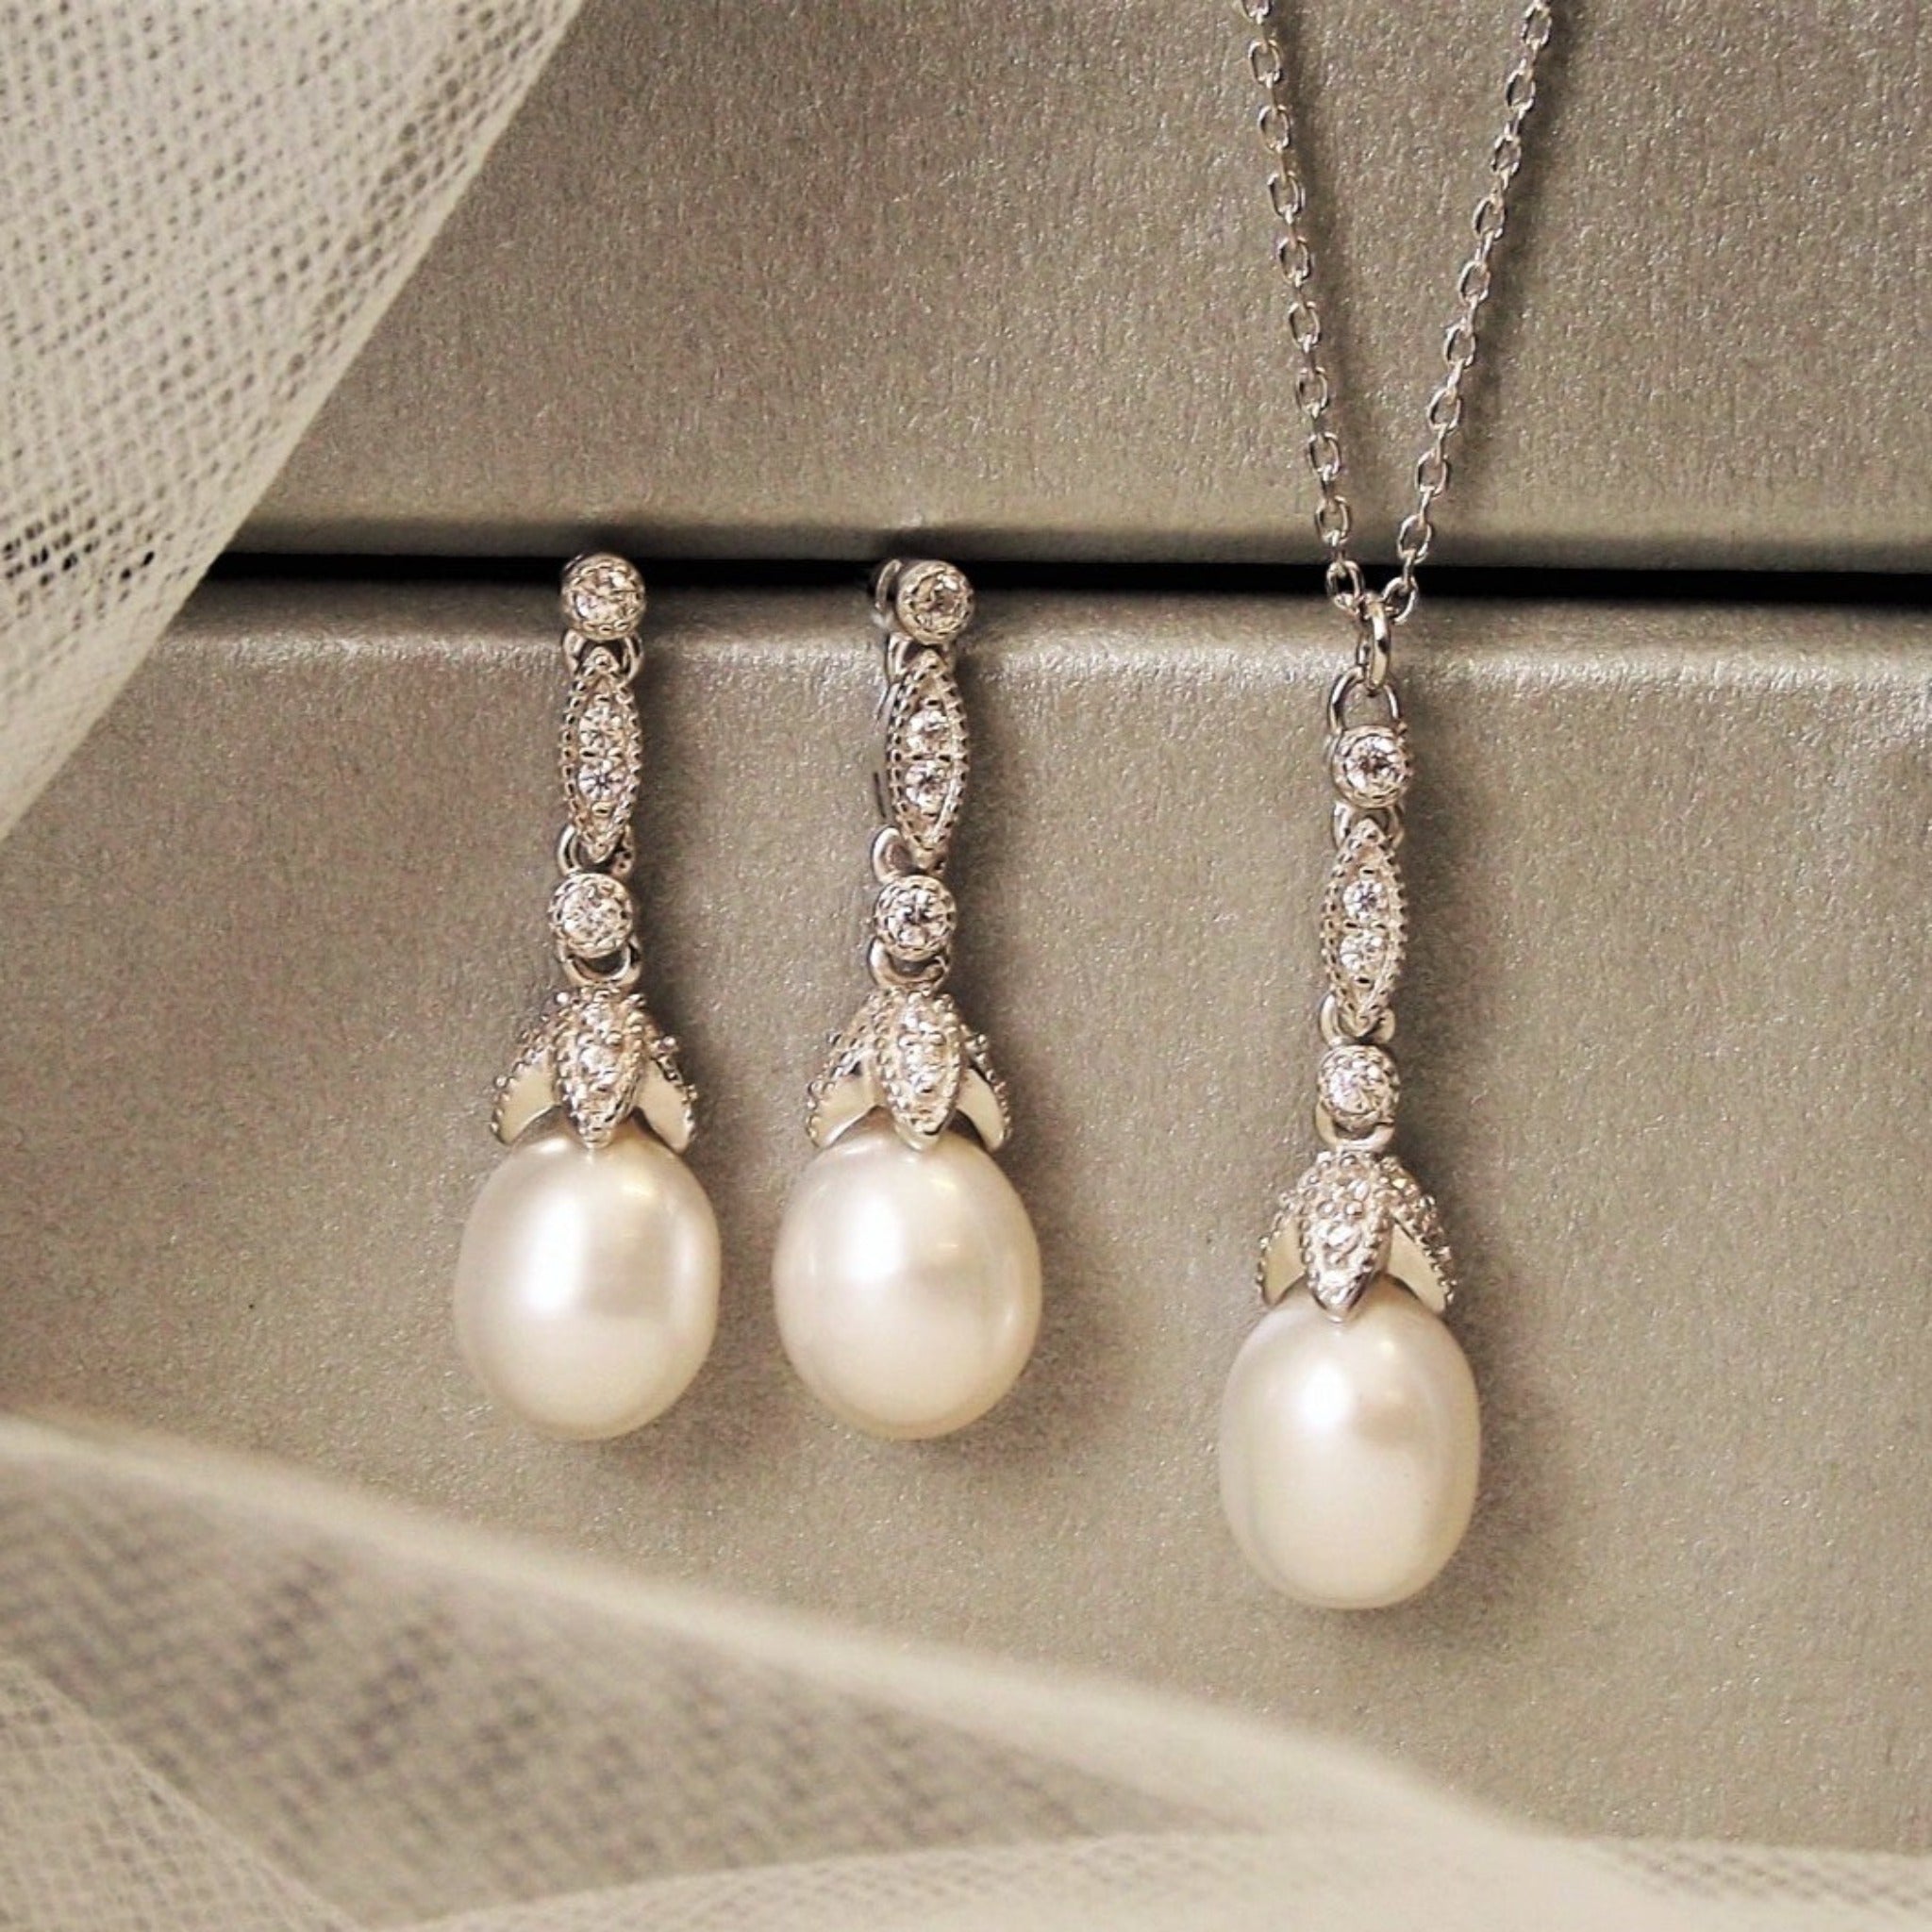 9ct White Gold Diamond Freshwater Cultured Pearl Pendant and Earrings Set |  0110894 | Beaverbrooks the Jewellers